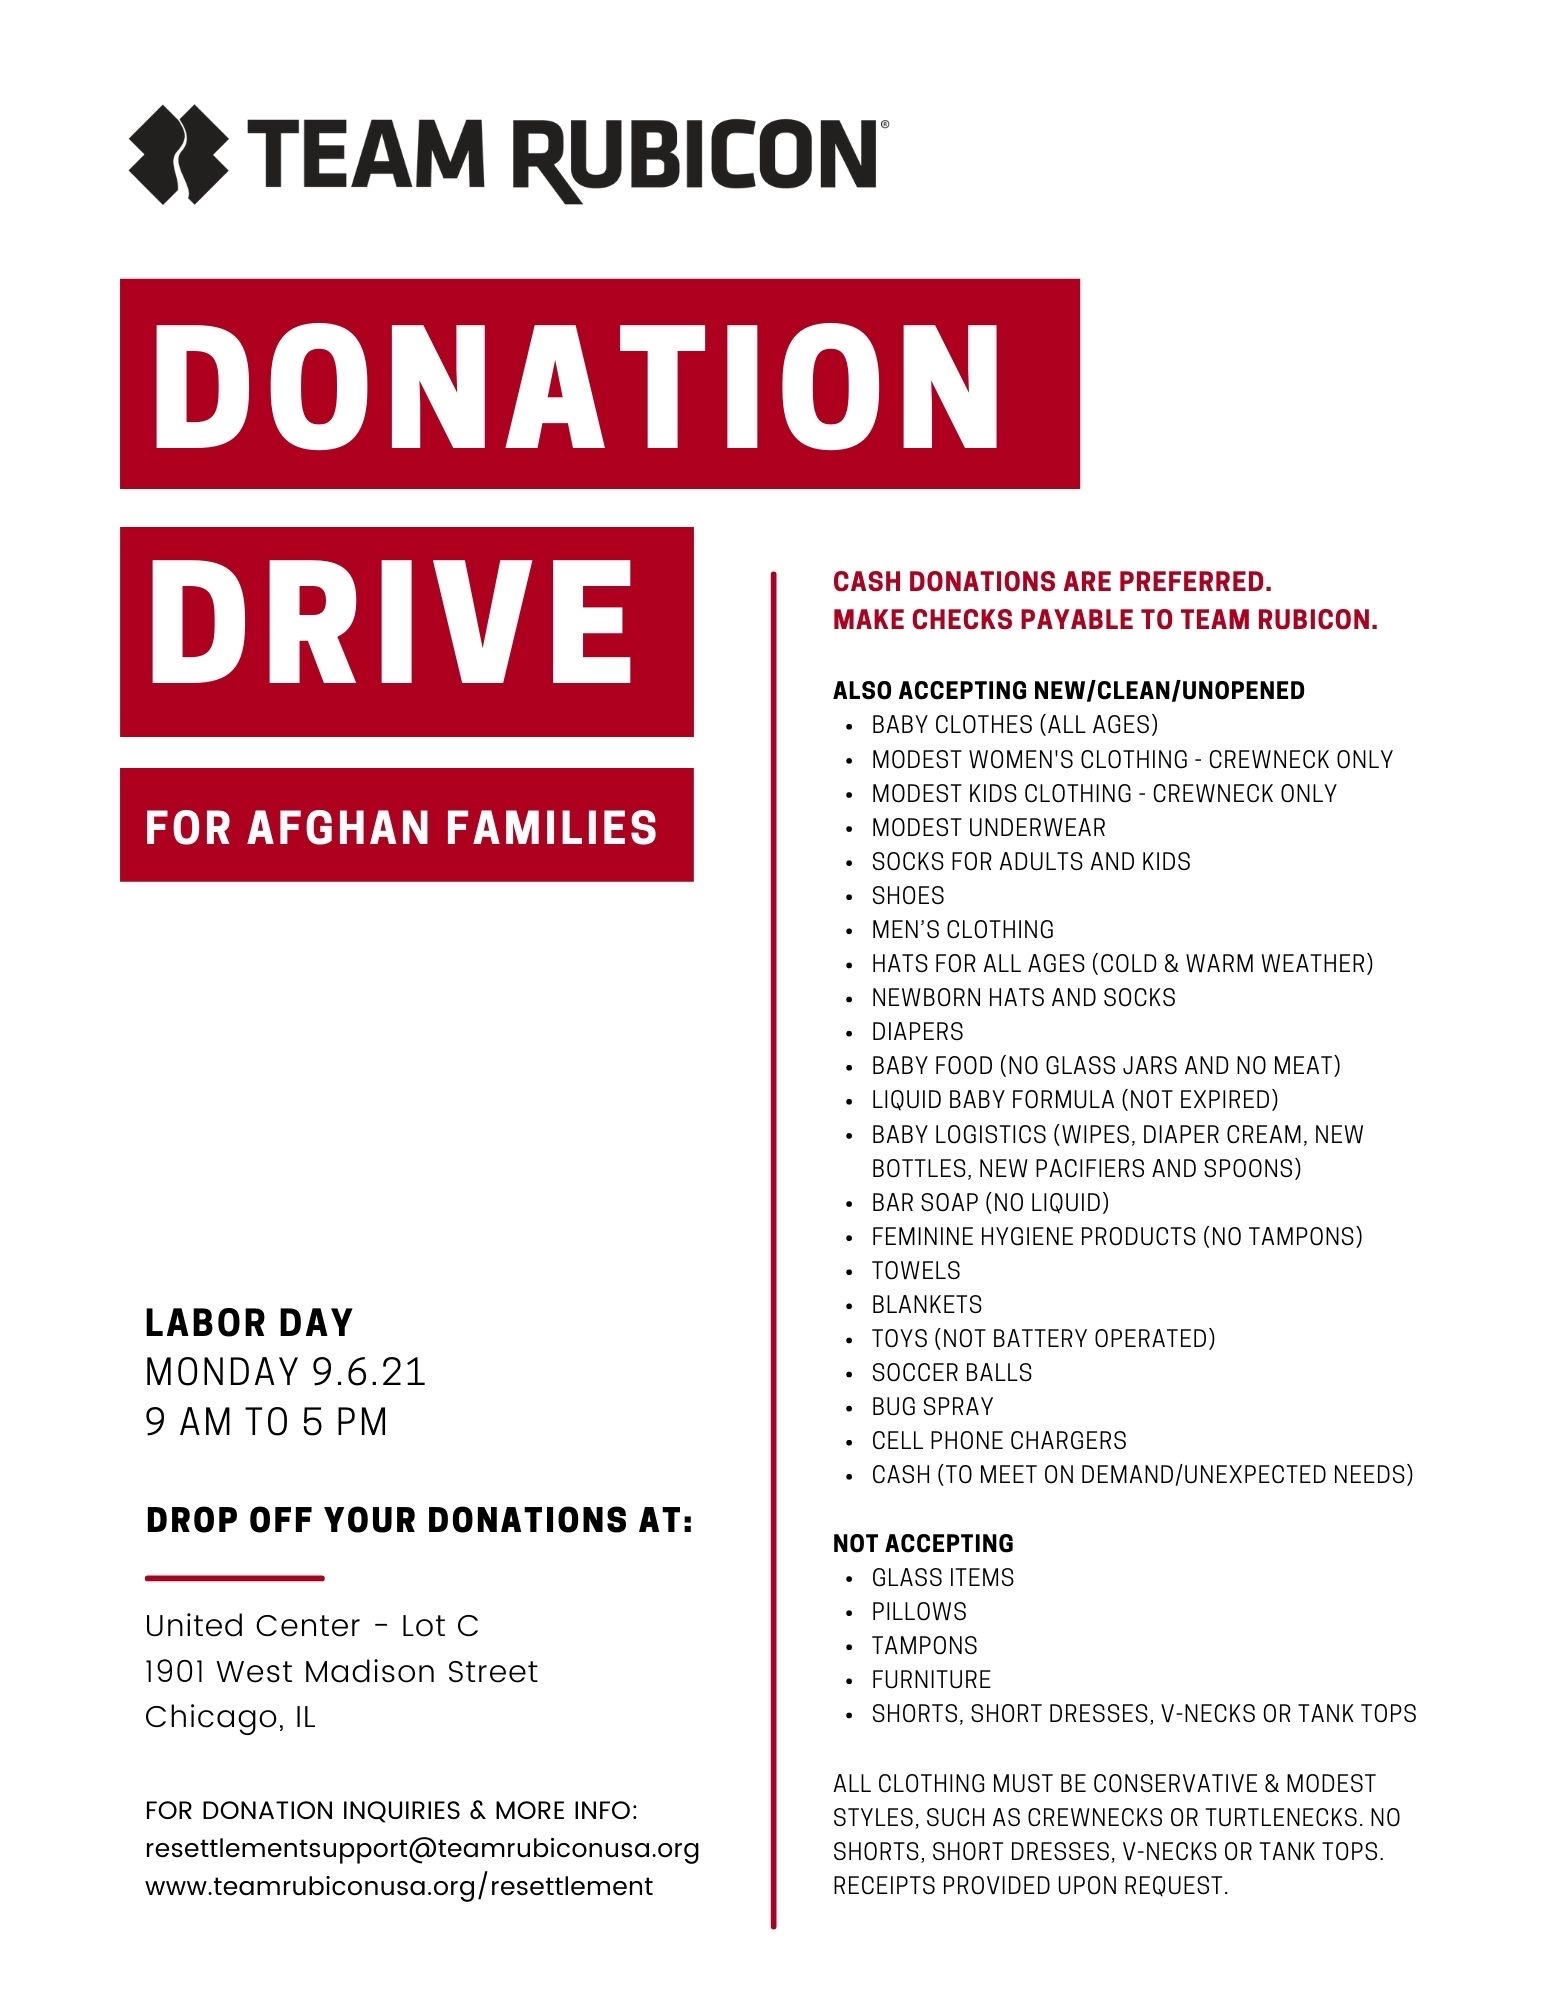 Information from a donation drive TR will be conducing at the United Center in Chicago, IL to benefit Afghan families being resettled in the US. 